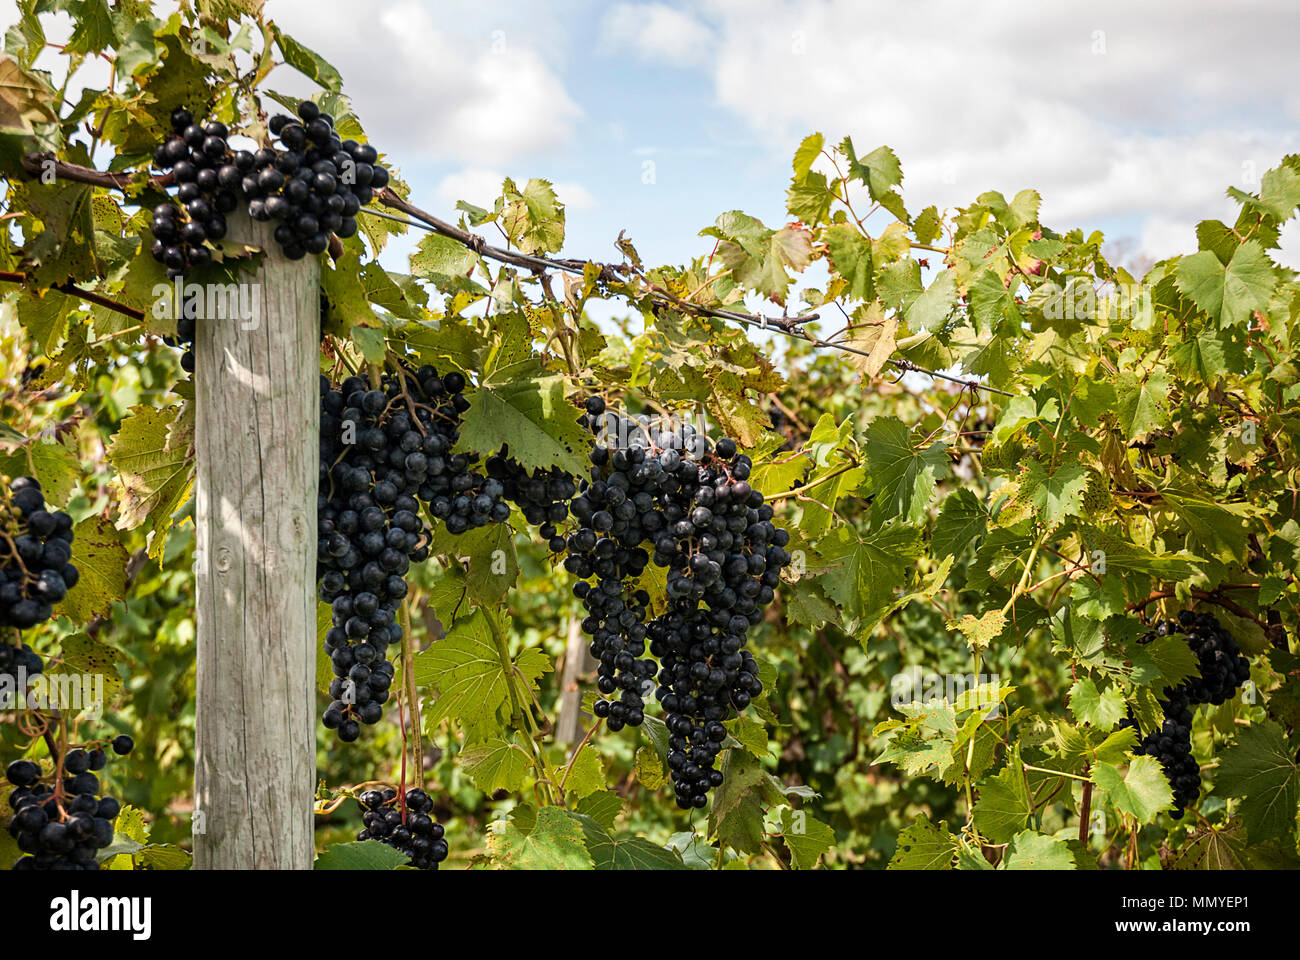 Bunches of ripe grapes hanging on the vine at a vineyard. Stock Photo